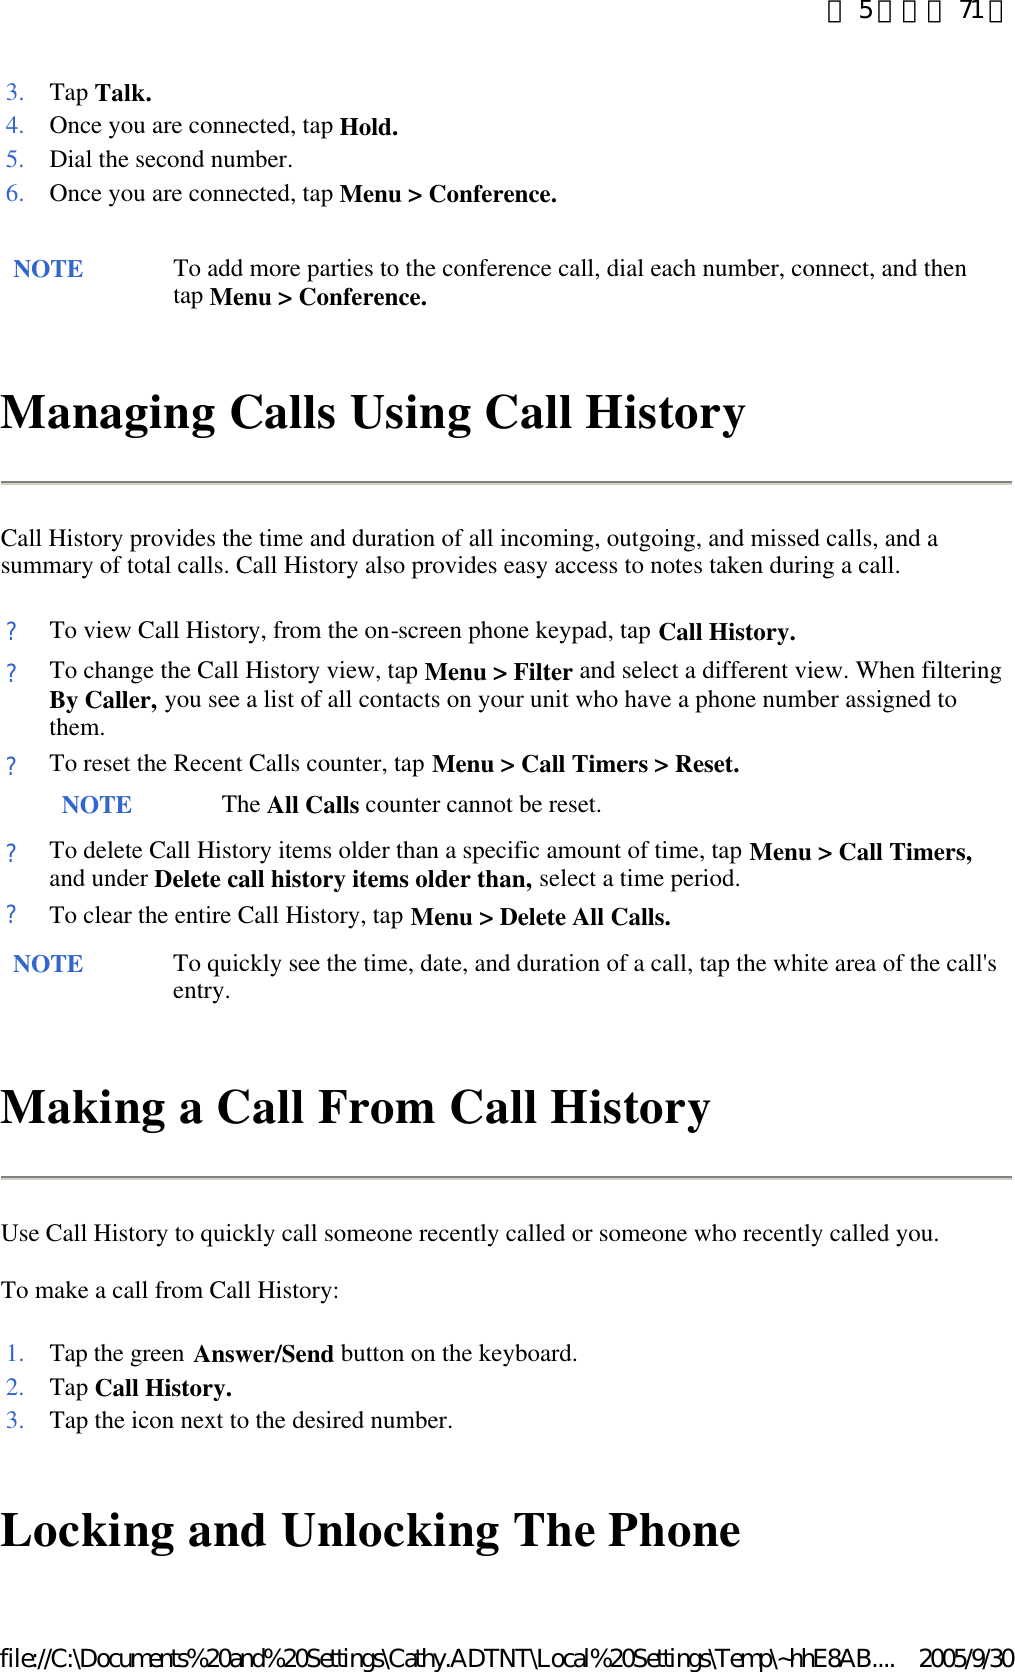 Managing Calls Using Call History  Call History provides the time and duration of all incoming, outgoing, and missed calls, and a summary of total calls. Call History also provides easy access to notes taken during a call.  Making a Call From Call History  Use Call History to quickly call someone recently called or someone who recently called you.  To make a call from Call History:  Locking and Unlocking The Phone  3. Tap Talk.4. Once you are connected, tap Hold.5. Dial the second number.6. Once you are connected, tap Menu &gt; Conference.NOTE To add more parties to the conference call, dial each number, connect, and then tap Menu &gt; Conference. ?To view Call History, from the on-screen phone keypad, tap Call History.?To change the Call History view, tap Menu &gt; Filter and select a different view. When filtering By Caller, you see a list of all contacts on your unit who have a phone number assigned to them. ?To reset the Recent Calls counter, tap Menu &gt; Call Timers &gt; Reset. NOTE The All Calls counter cannot be reset. ?To delete Call History items older than a specific amount of time, tap Menu &gt; Call Timers, and under Delete call history items older than, select a time period. ?To clear the entire Call History, tap Menu &gt; Delete All Calls.NOTE To quickly see the time, date, and duration of a call, tap the white area of the call&apos;s entry.  1. Tap the green Answer/Send button on the keyboard. 2. Tap Call History.3. Tap the icon next to the desired number. 第 5 頁，共 71 頁2005/9/30file://C:\Documents%20and%20Settings\Cathy.ADTNT\Local%20Settings\Temp\~hhE8AB....